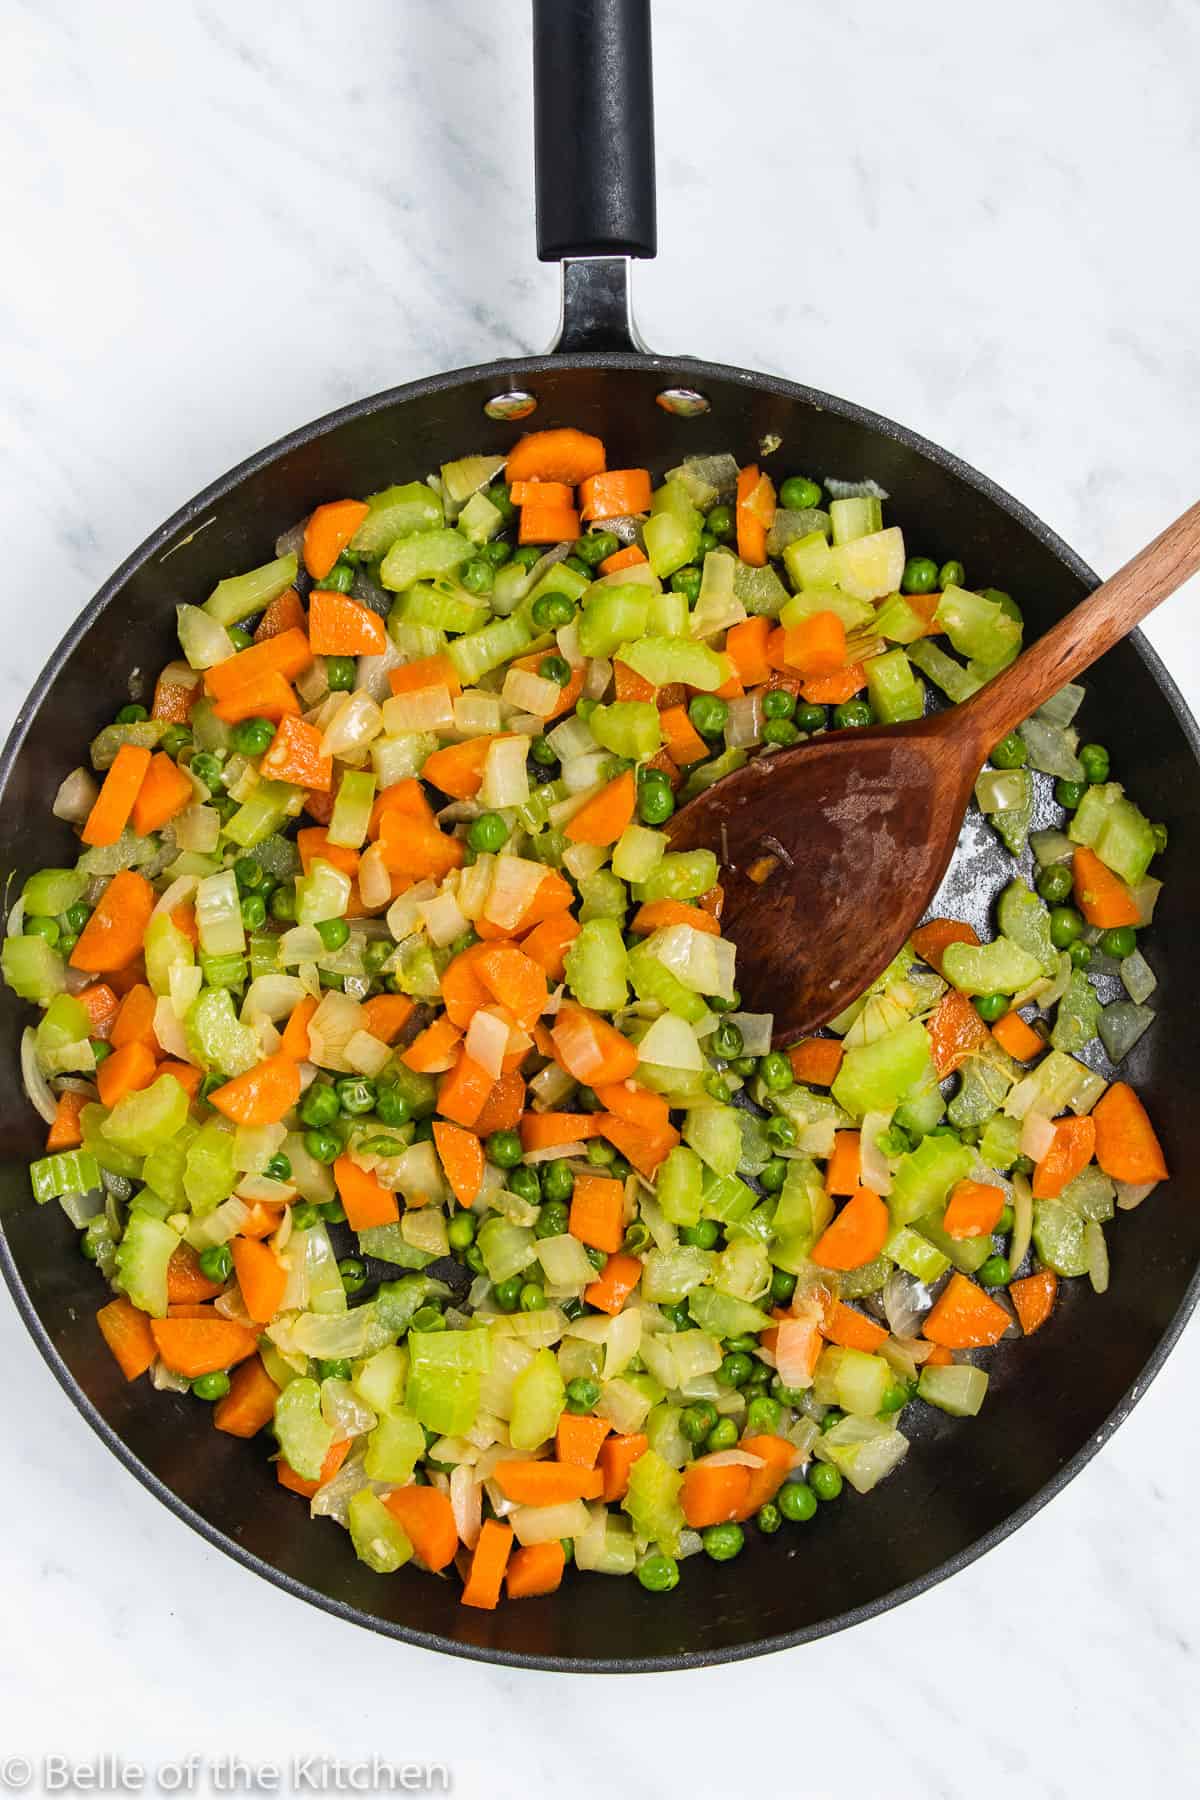 a skillet full of vegetables and a wooden spoon.